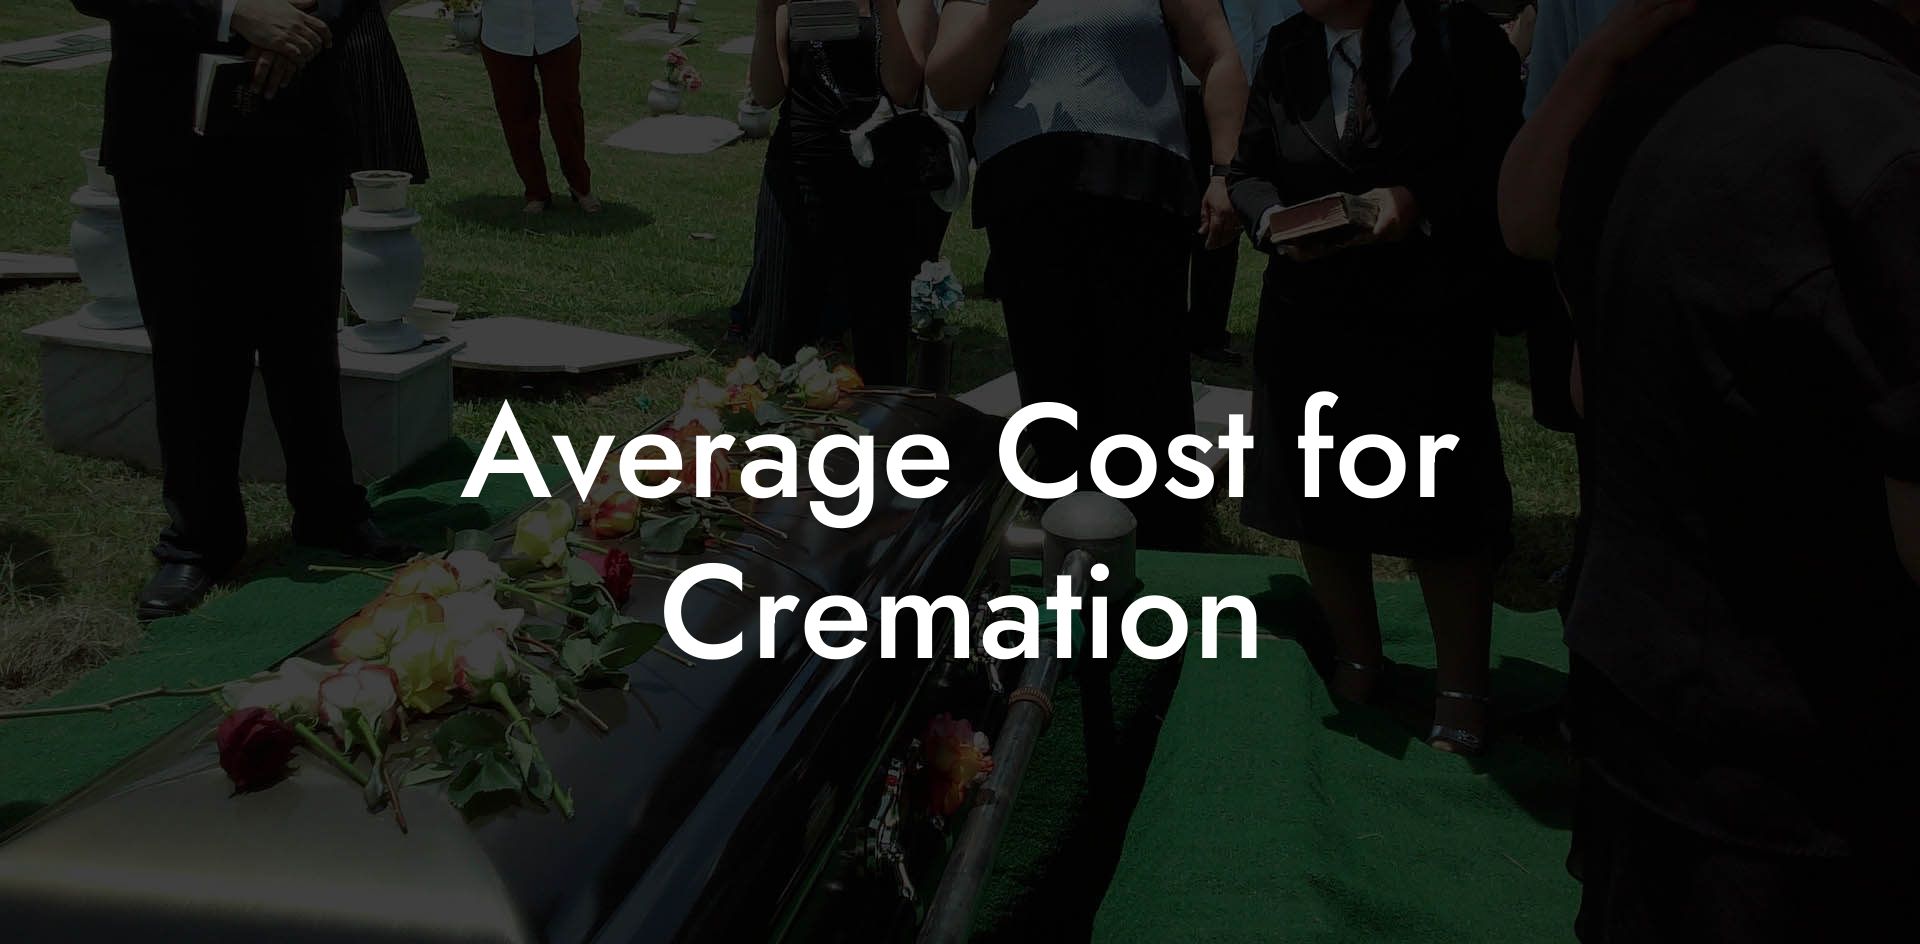 Average Cost for Cremation